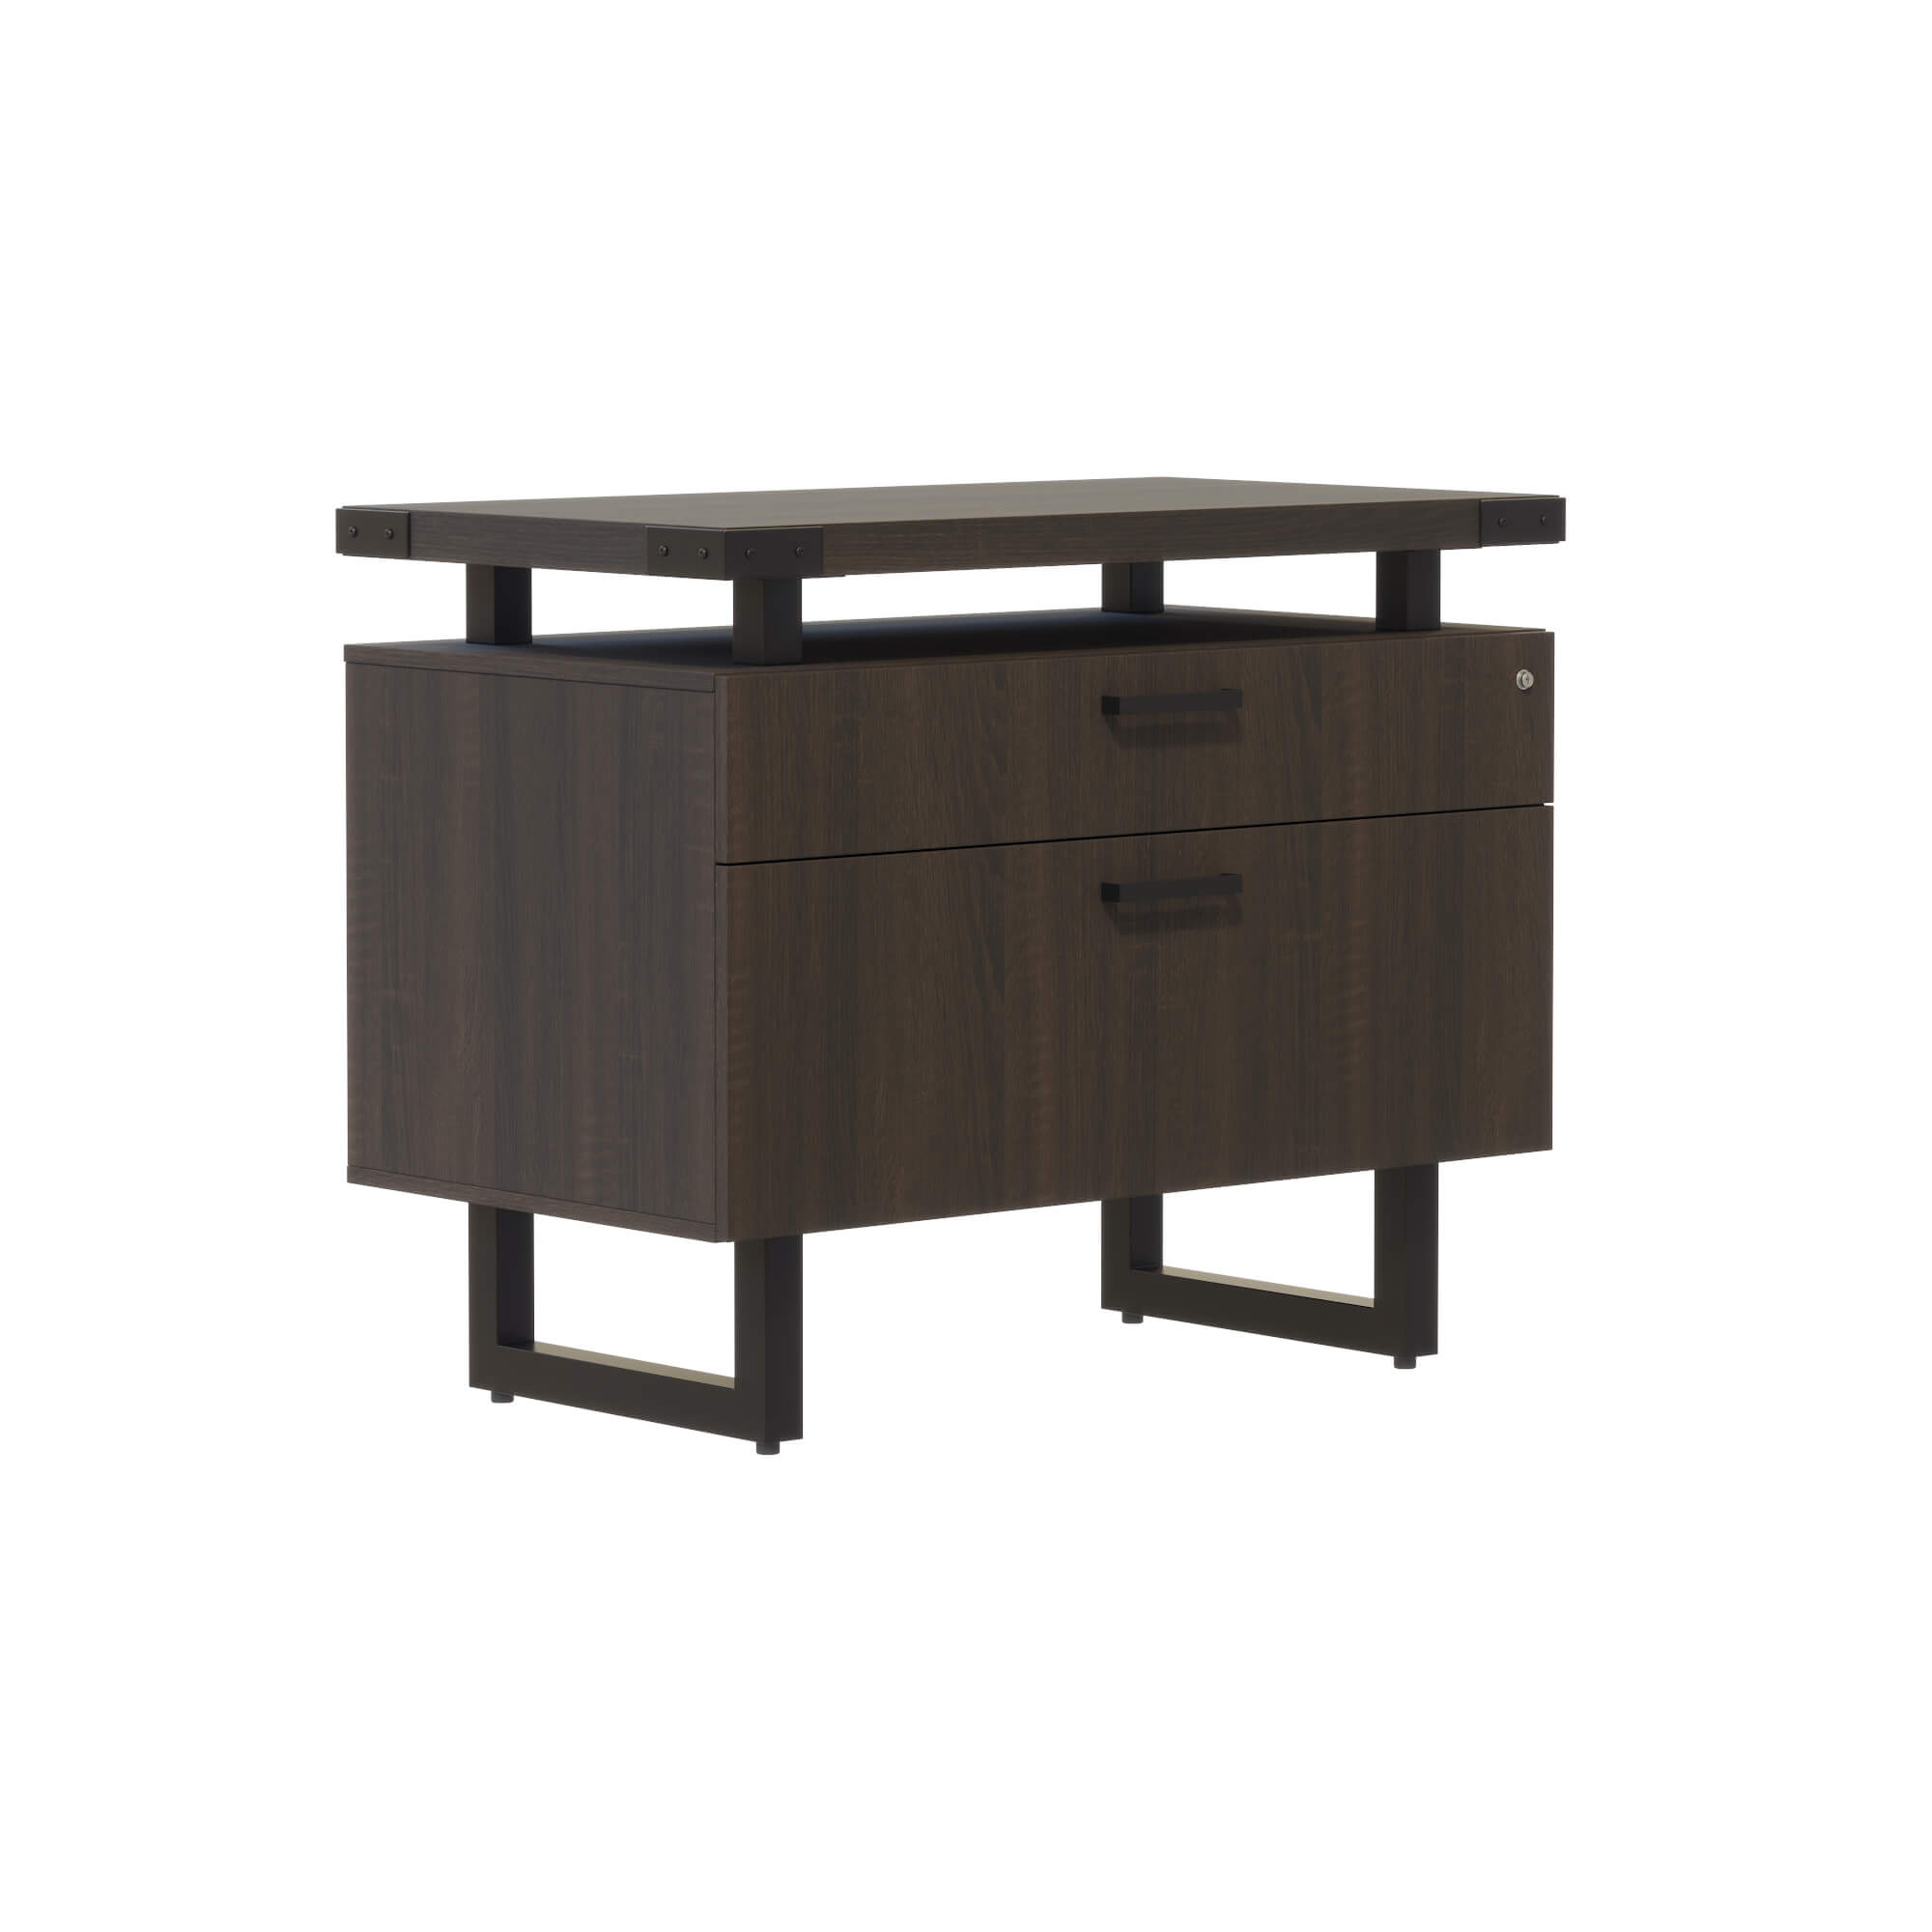 Conference room storage and accessories CUB MRLF36STO FAS 1